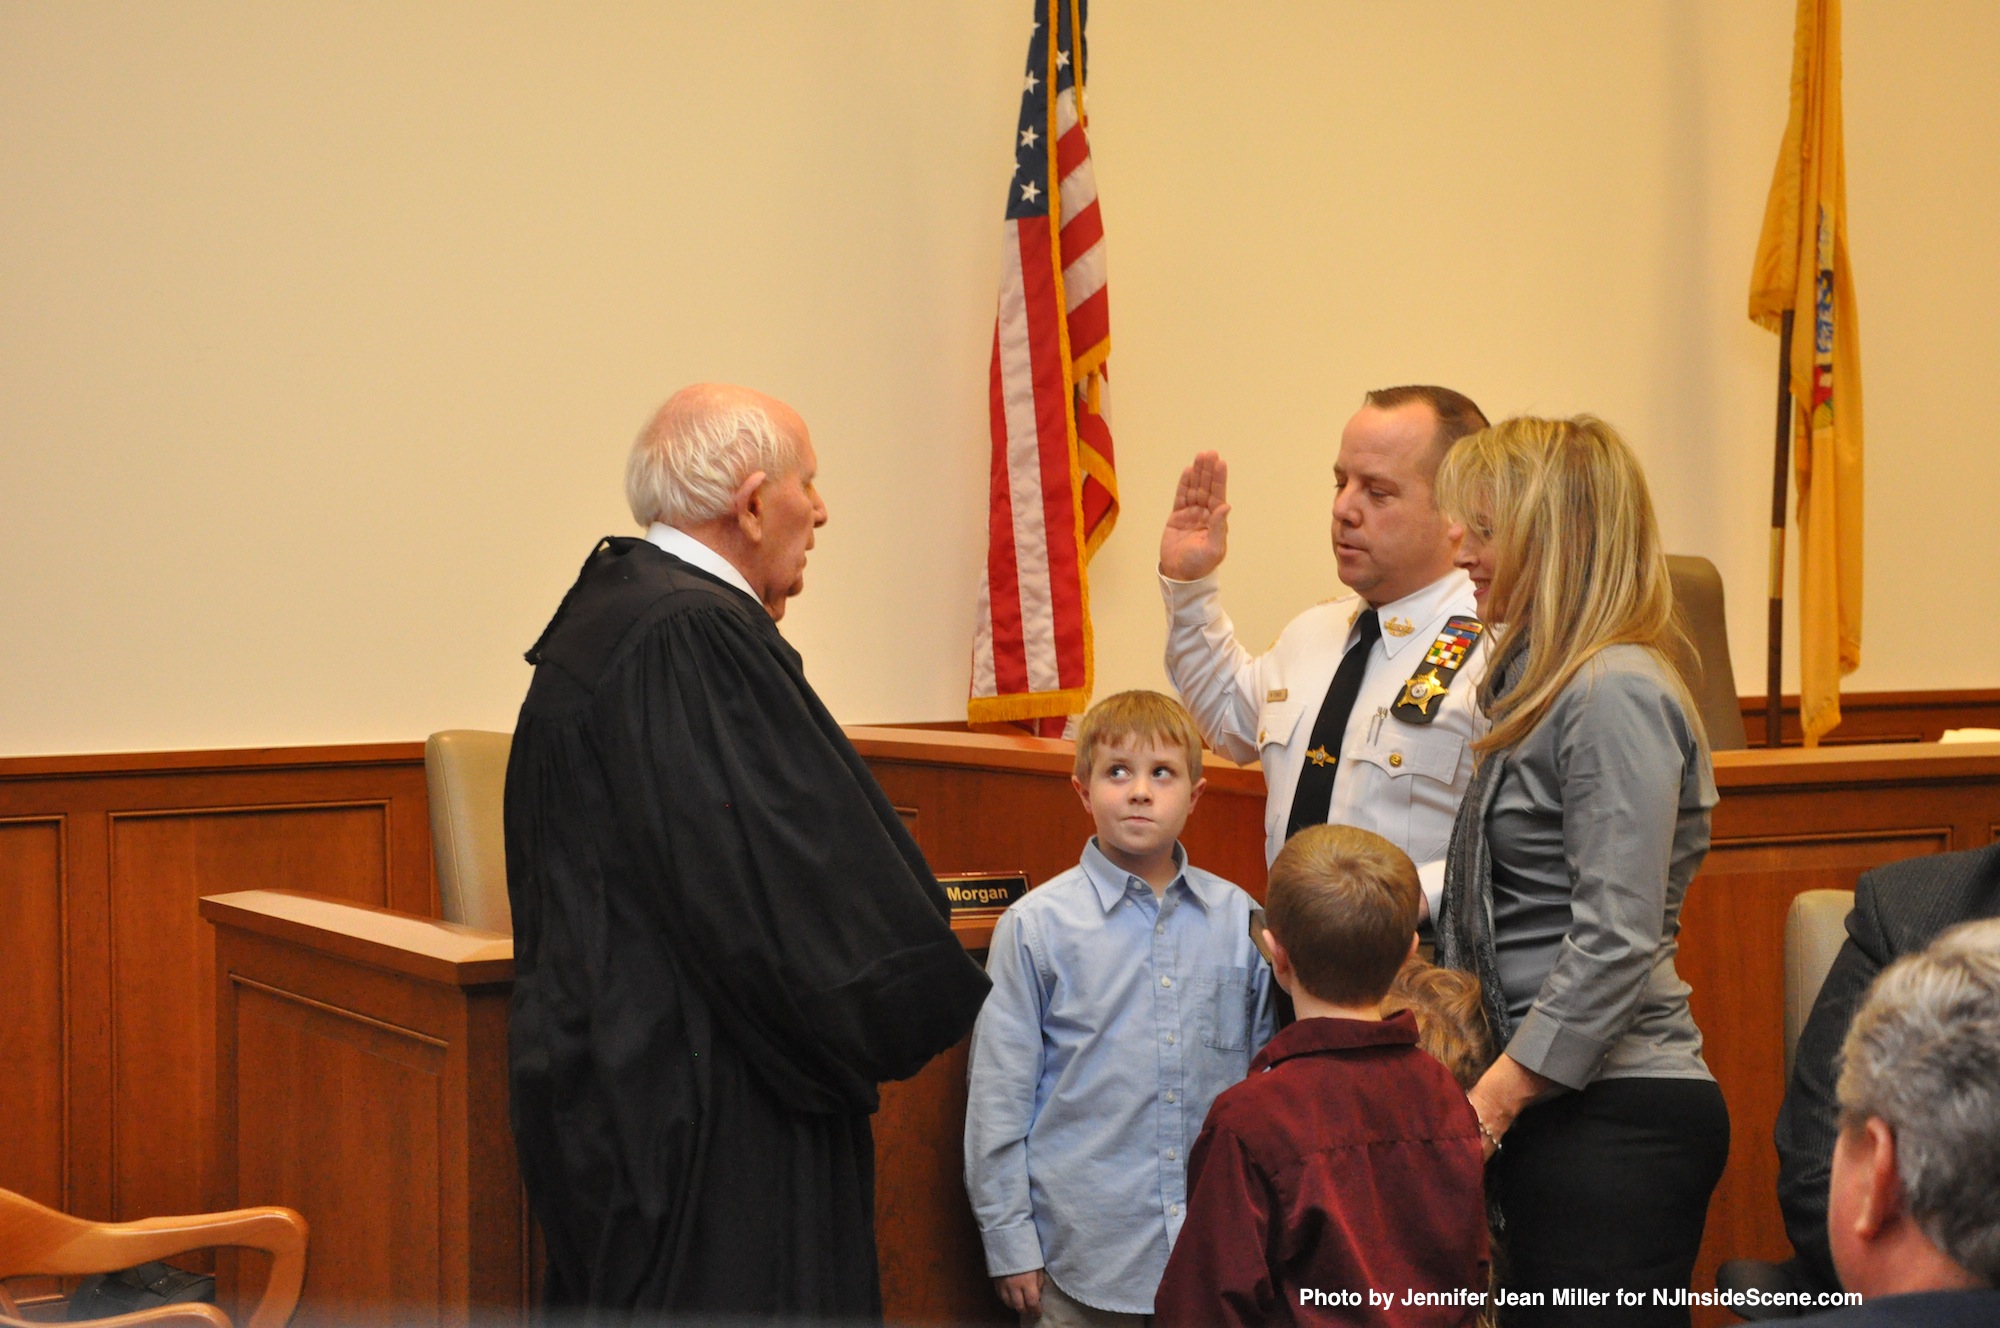 Sheriff Michael Strada, with his family, at the swearing in, with Judge Frederic Weber.